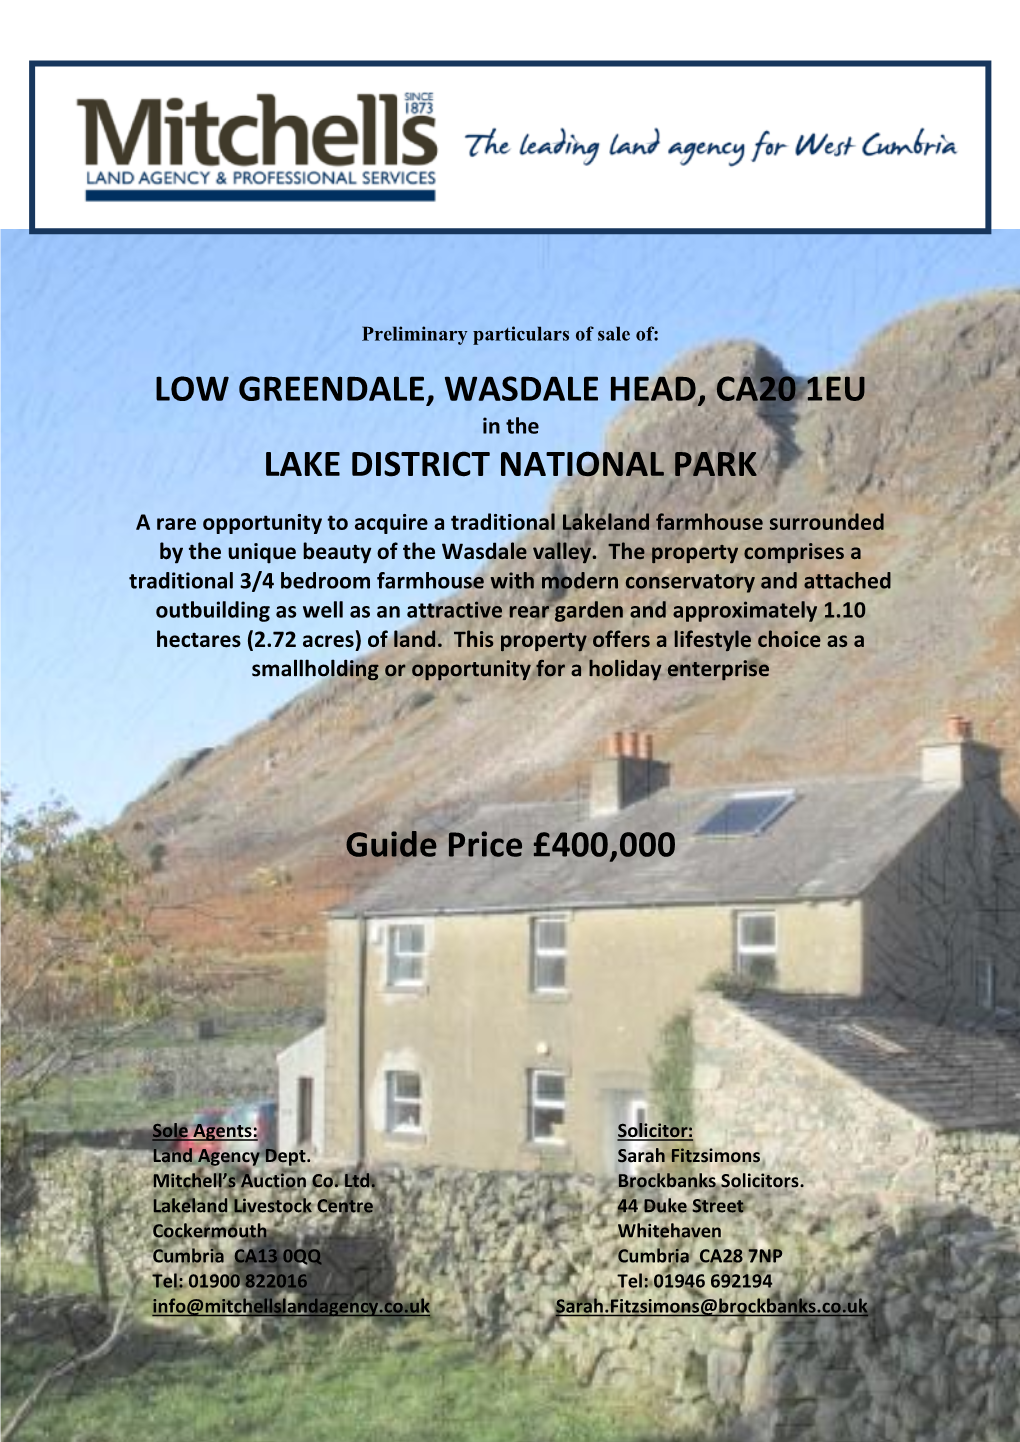 LOW GREENDALE, WASDALE HEAD, CA20 1EU in the LAKE DISTRICT NATIONAL PARK